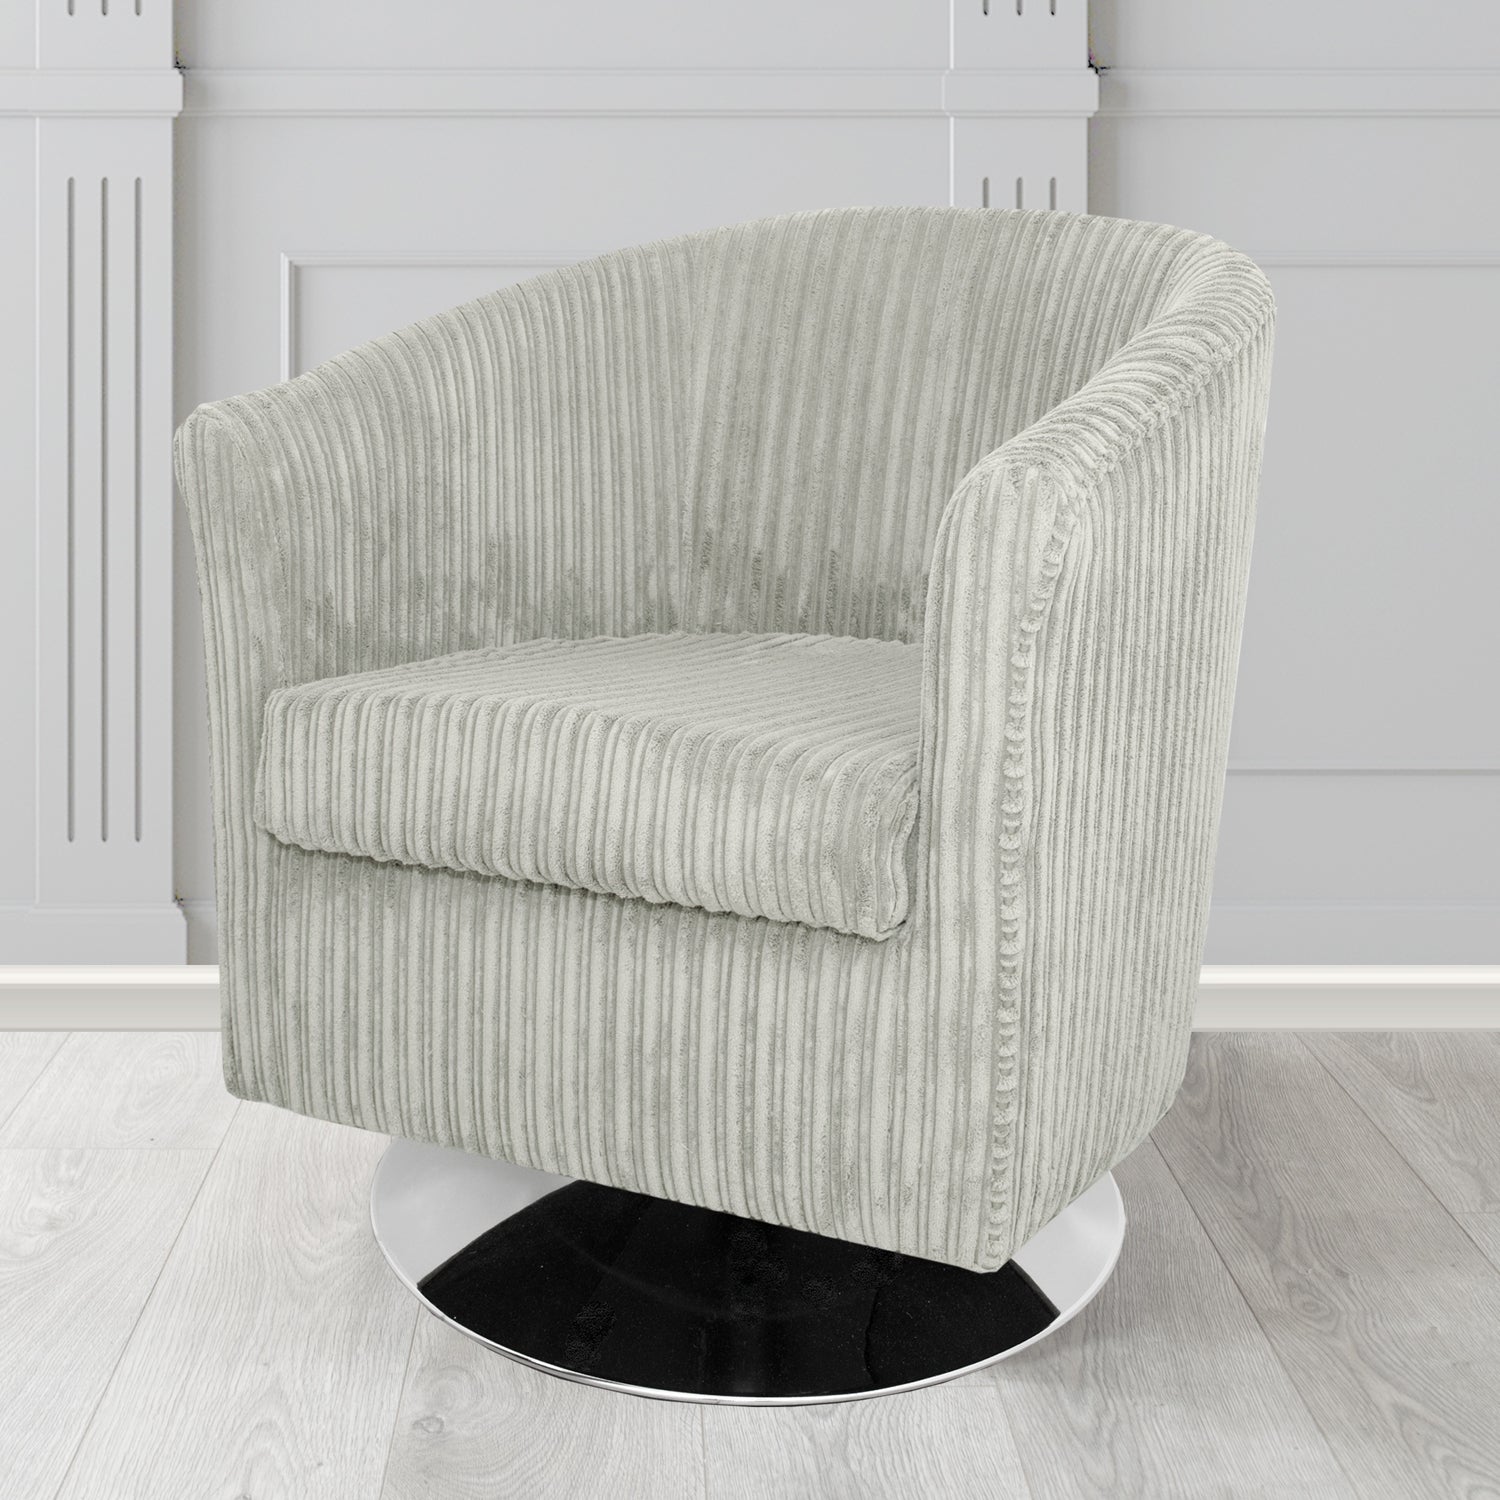 Tuscany Conway Silver Plain Texture Fabric Swivel Tub Chair (6581747974186)